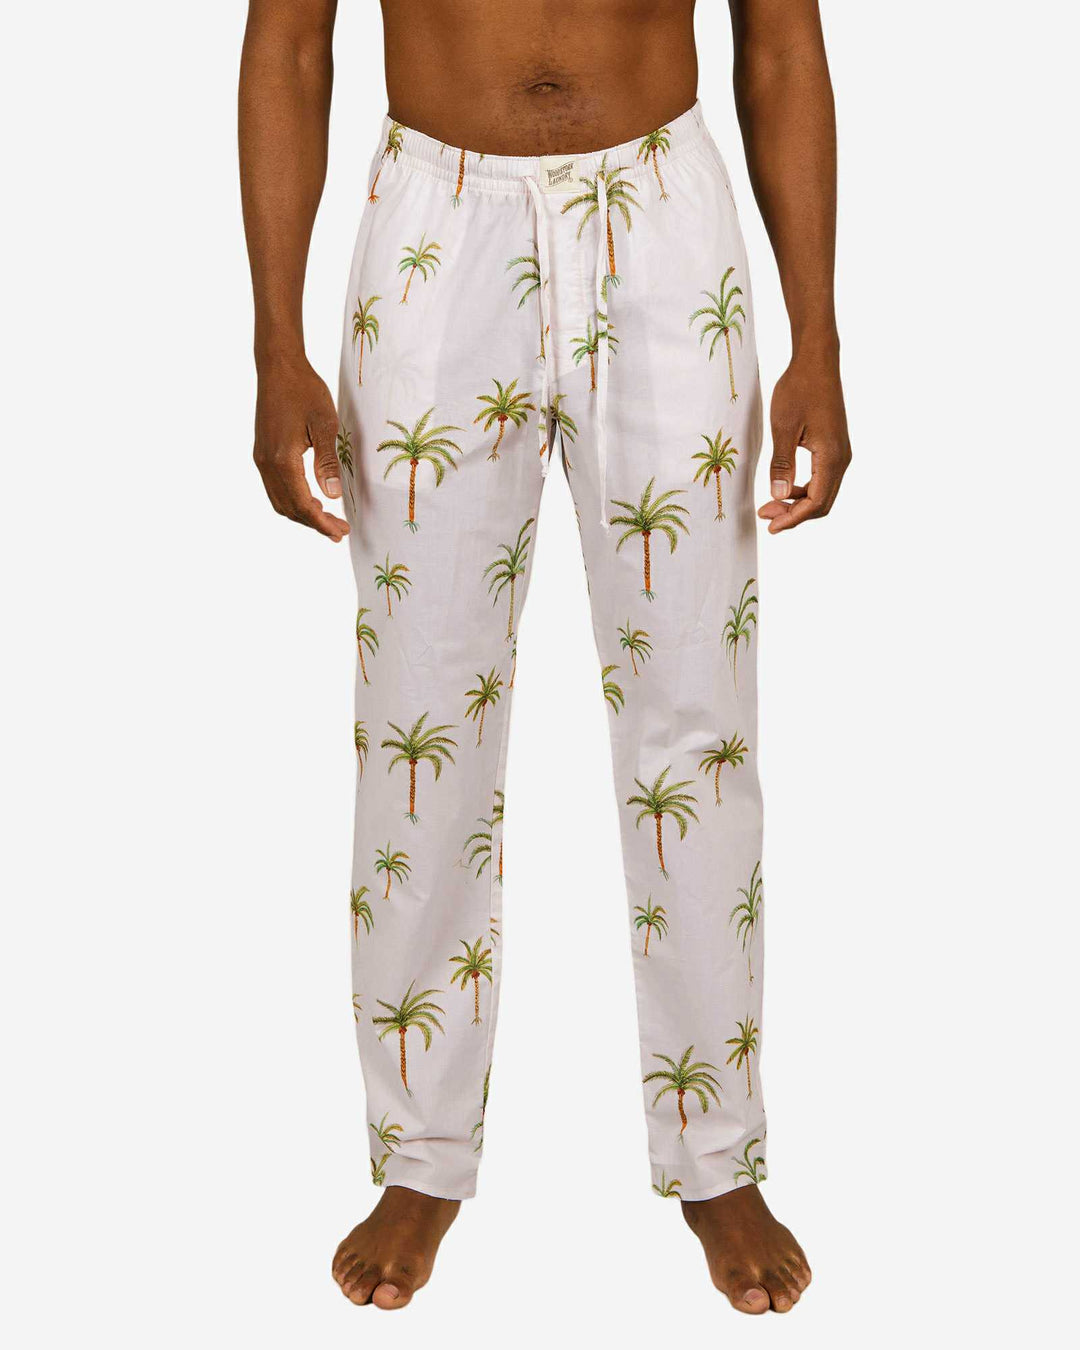 Mens lounge pants white with palm trees